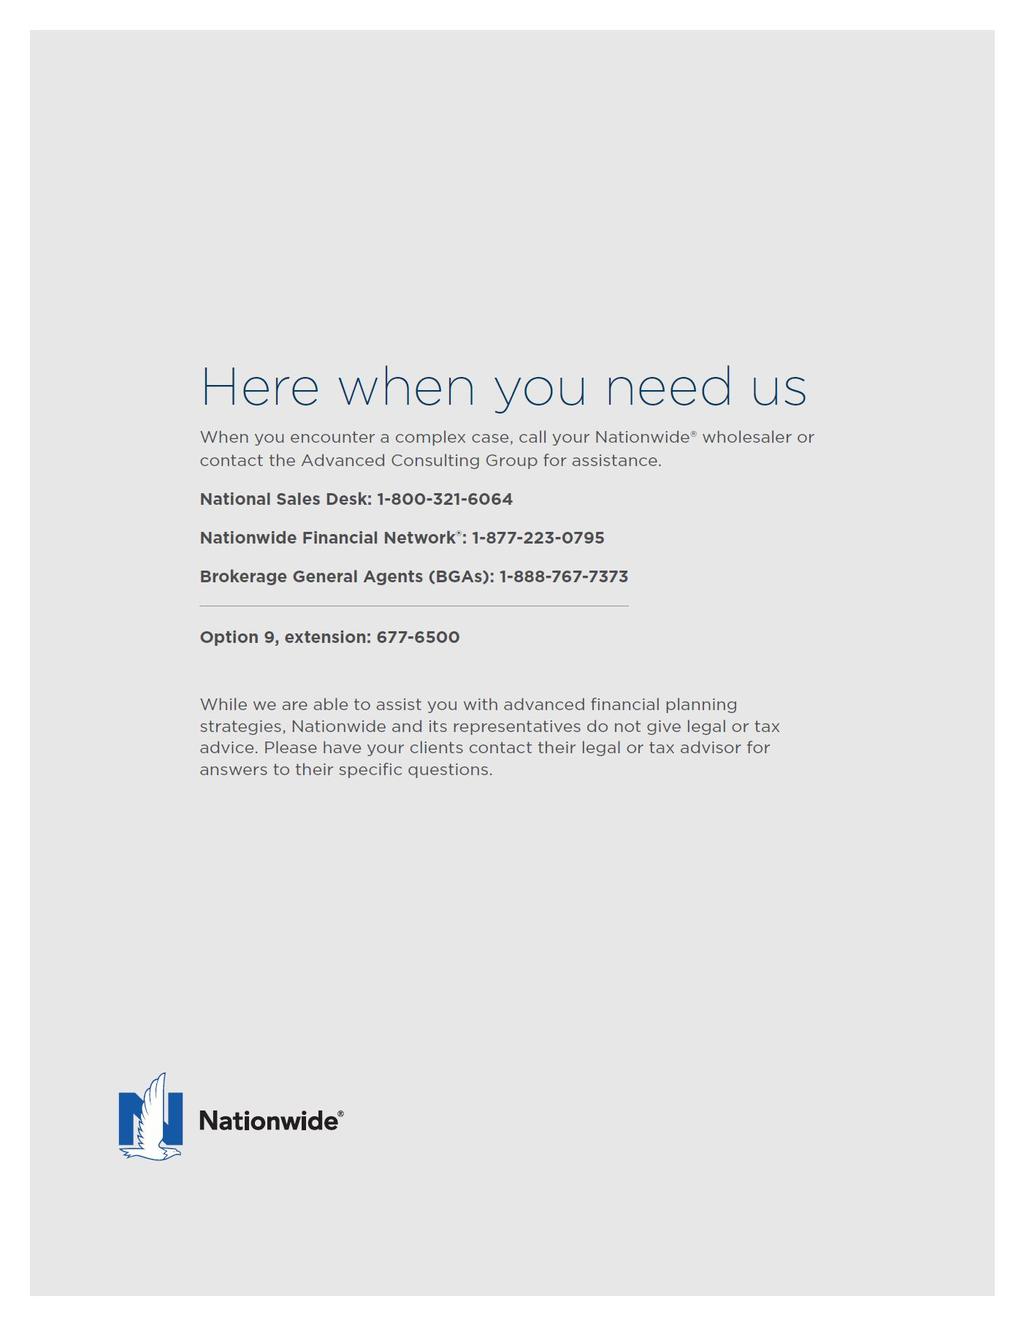 Nationwide, the Nationwide N and Eagle, Nationwide is on your side and Nationwide Financial Network are